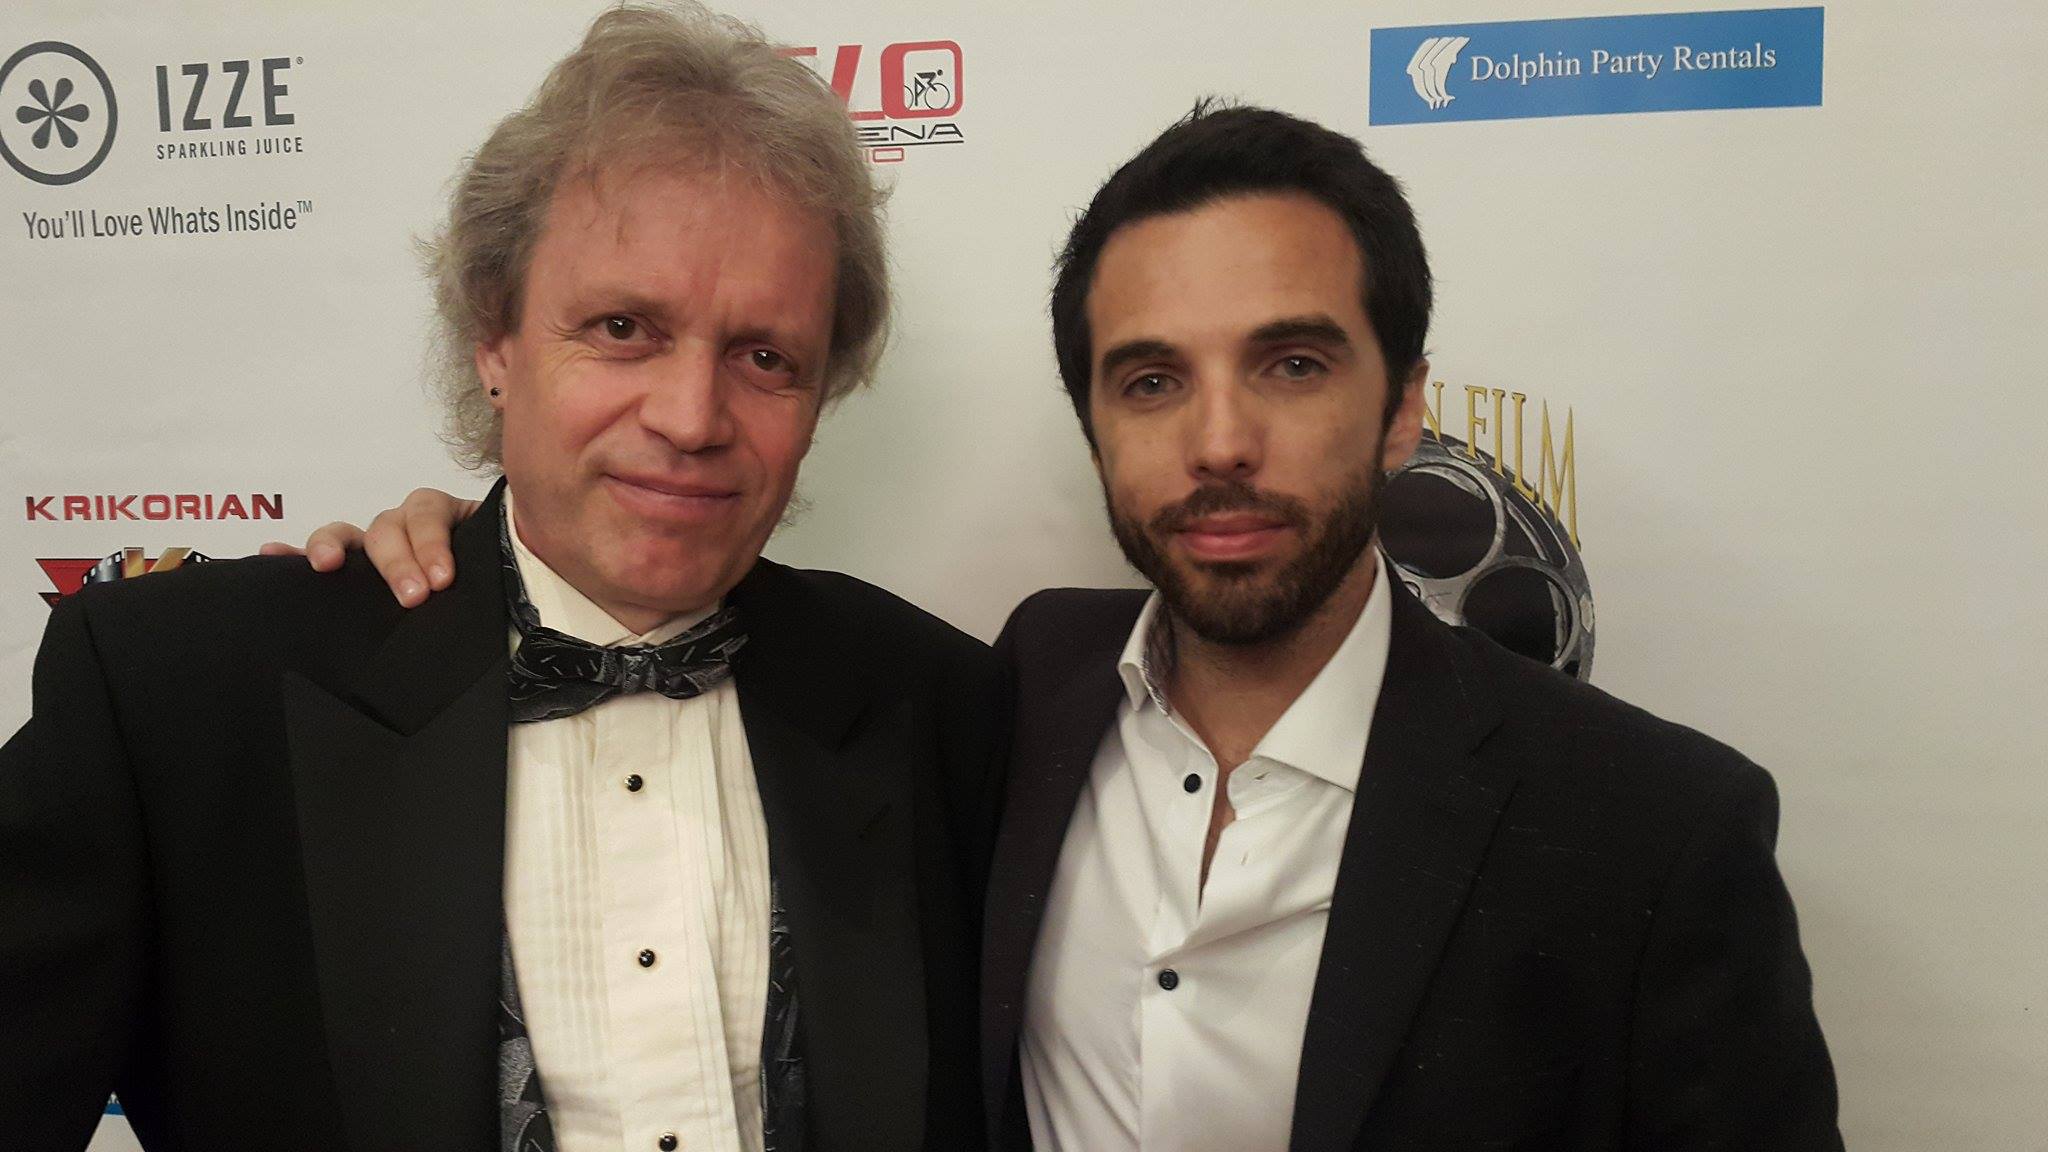 Tiago P. de Carvalho on the right and Erik Lundmark from Leomark Studios. NIRVANA nominated for Best Action Film of the Year